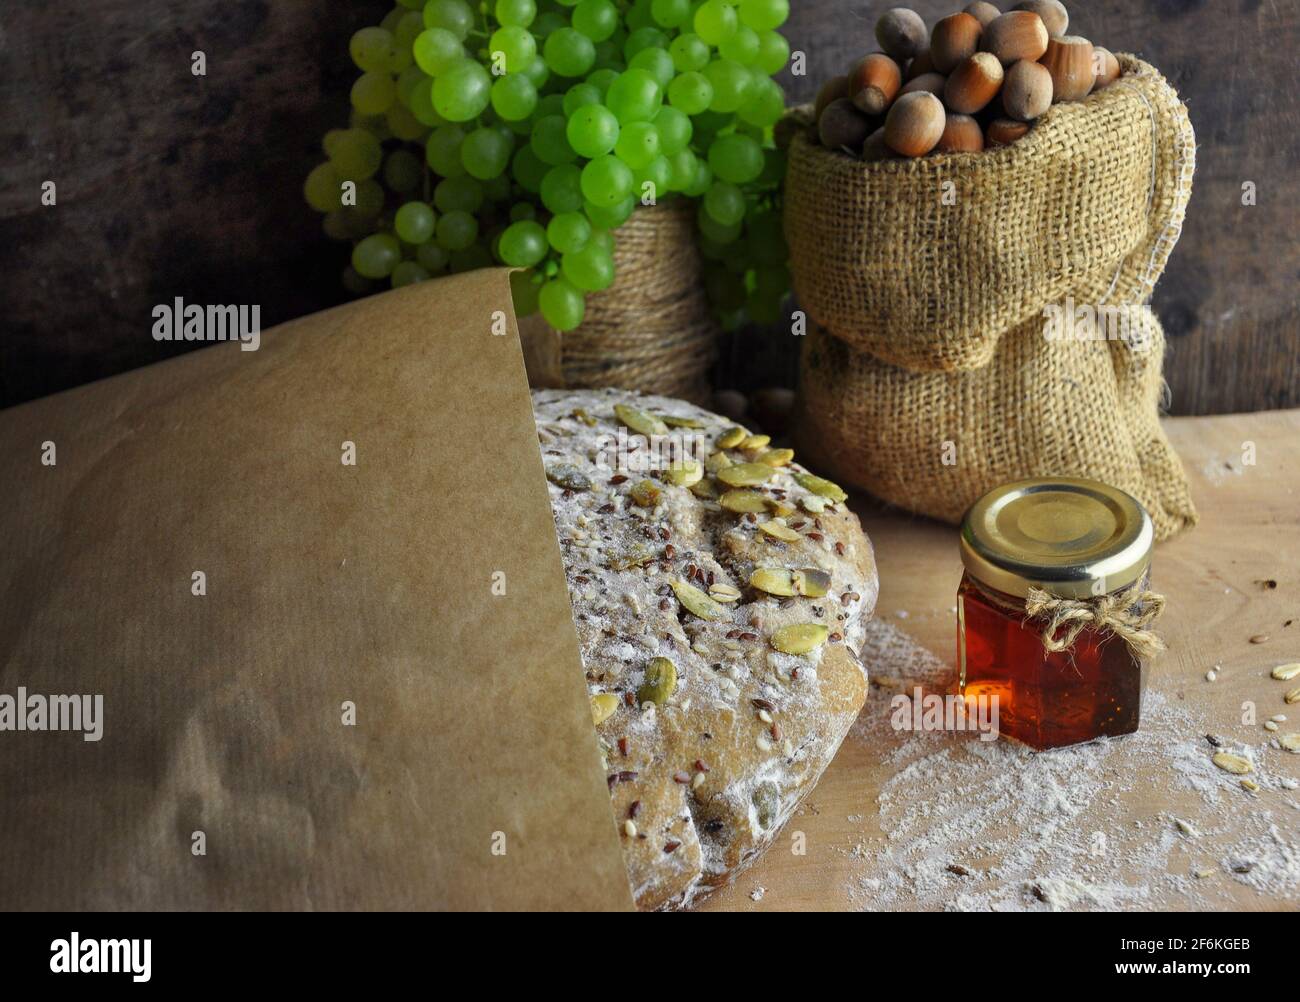 Bread, grapes, nuts, honey, rustic wood background Stock Photo